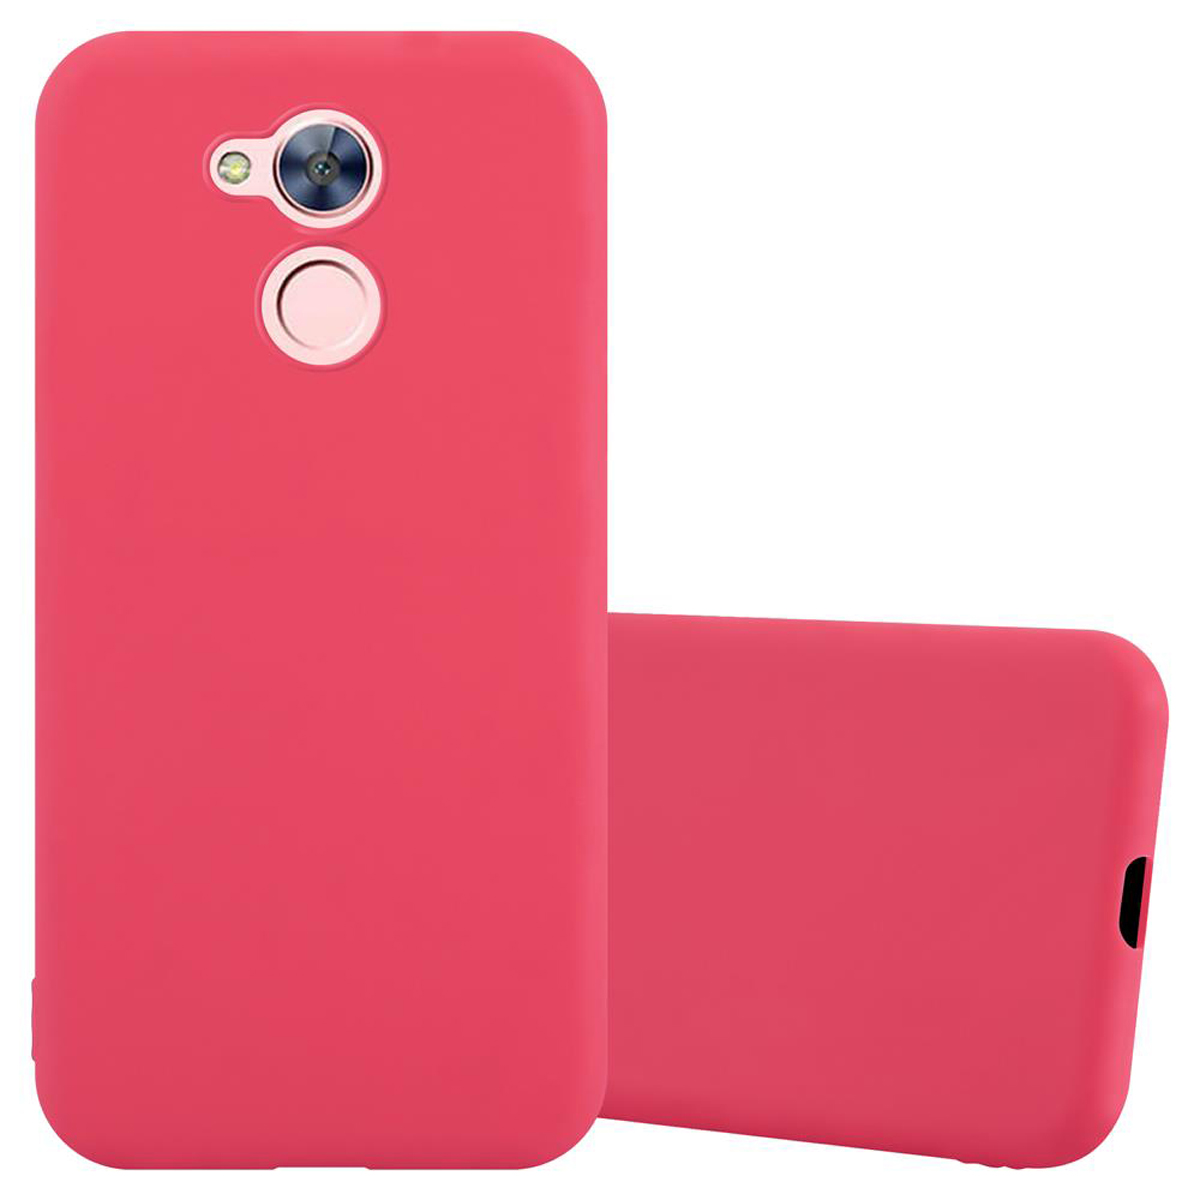 6A CADORABO Candy Backcover, CANDY / Honor, PRO, PRO ROT im 5C TPU Style, Hülle